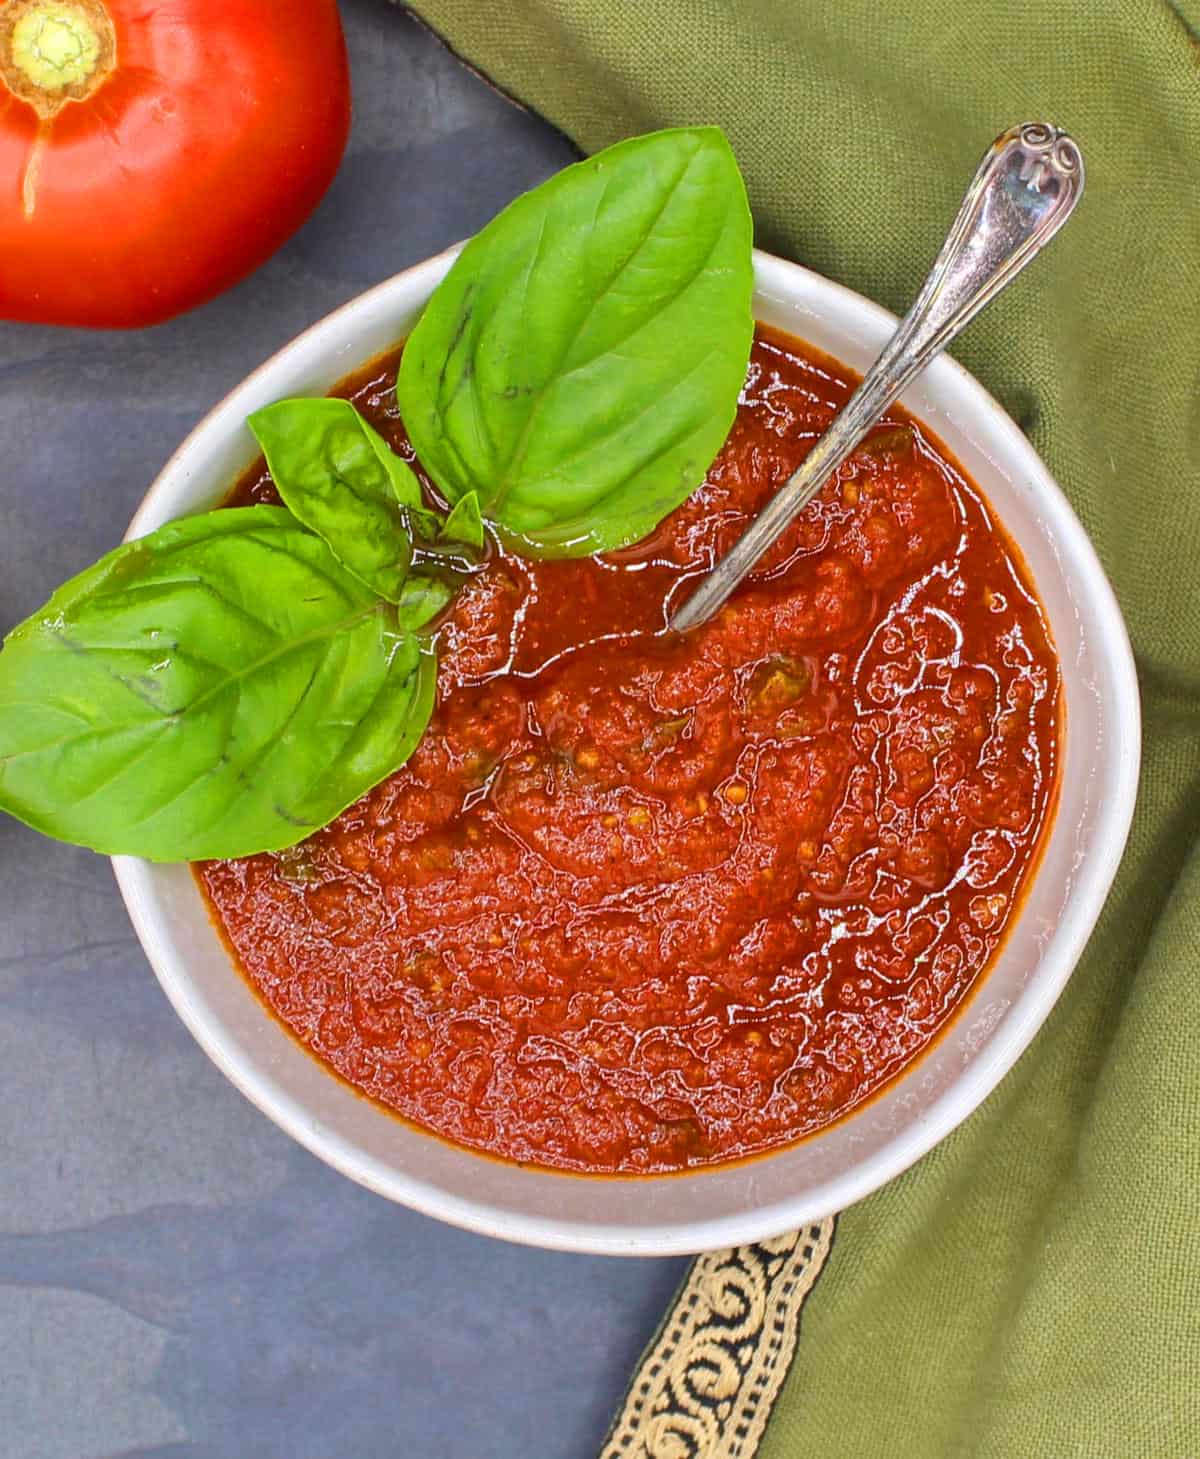 Tomato sauce in bowl with basil leaves and tomato in background.